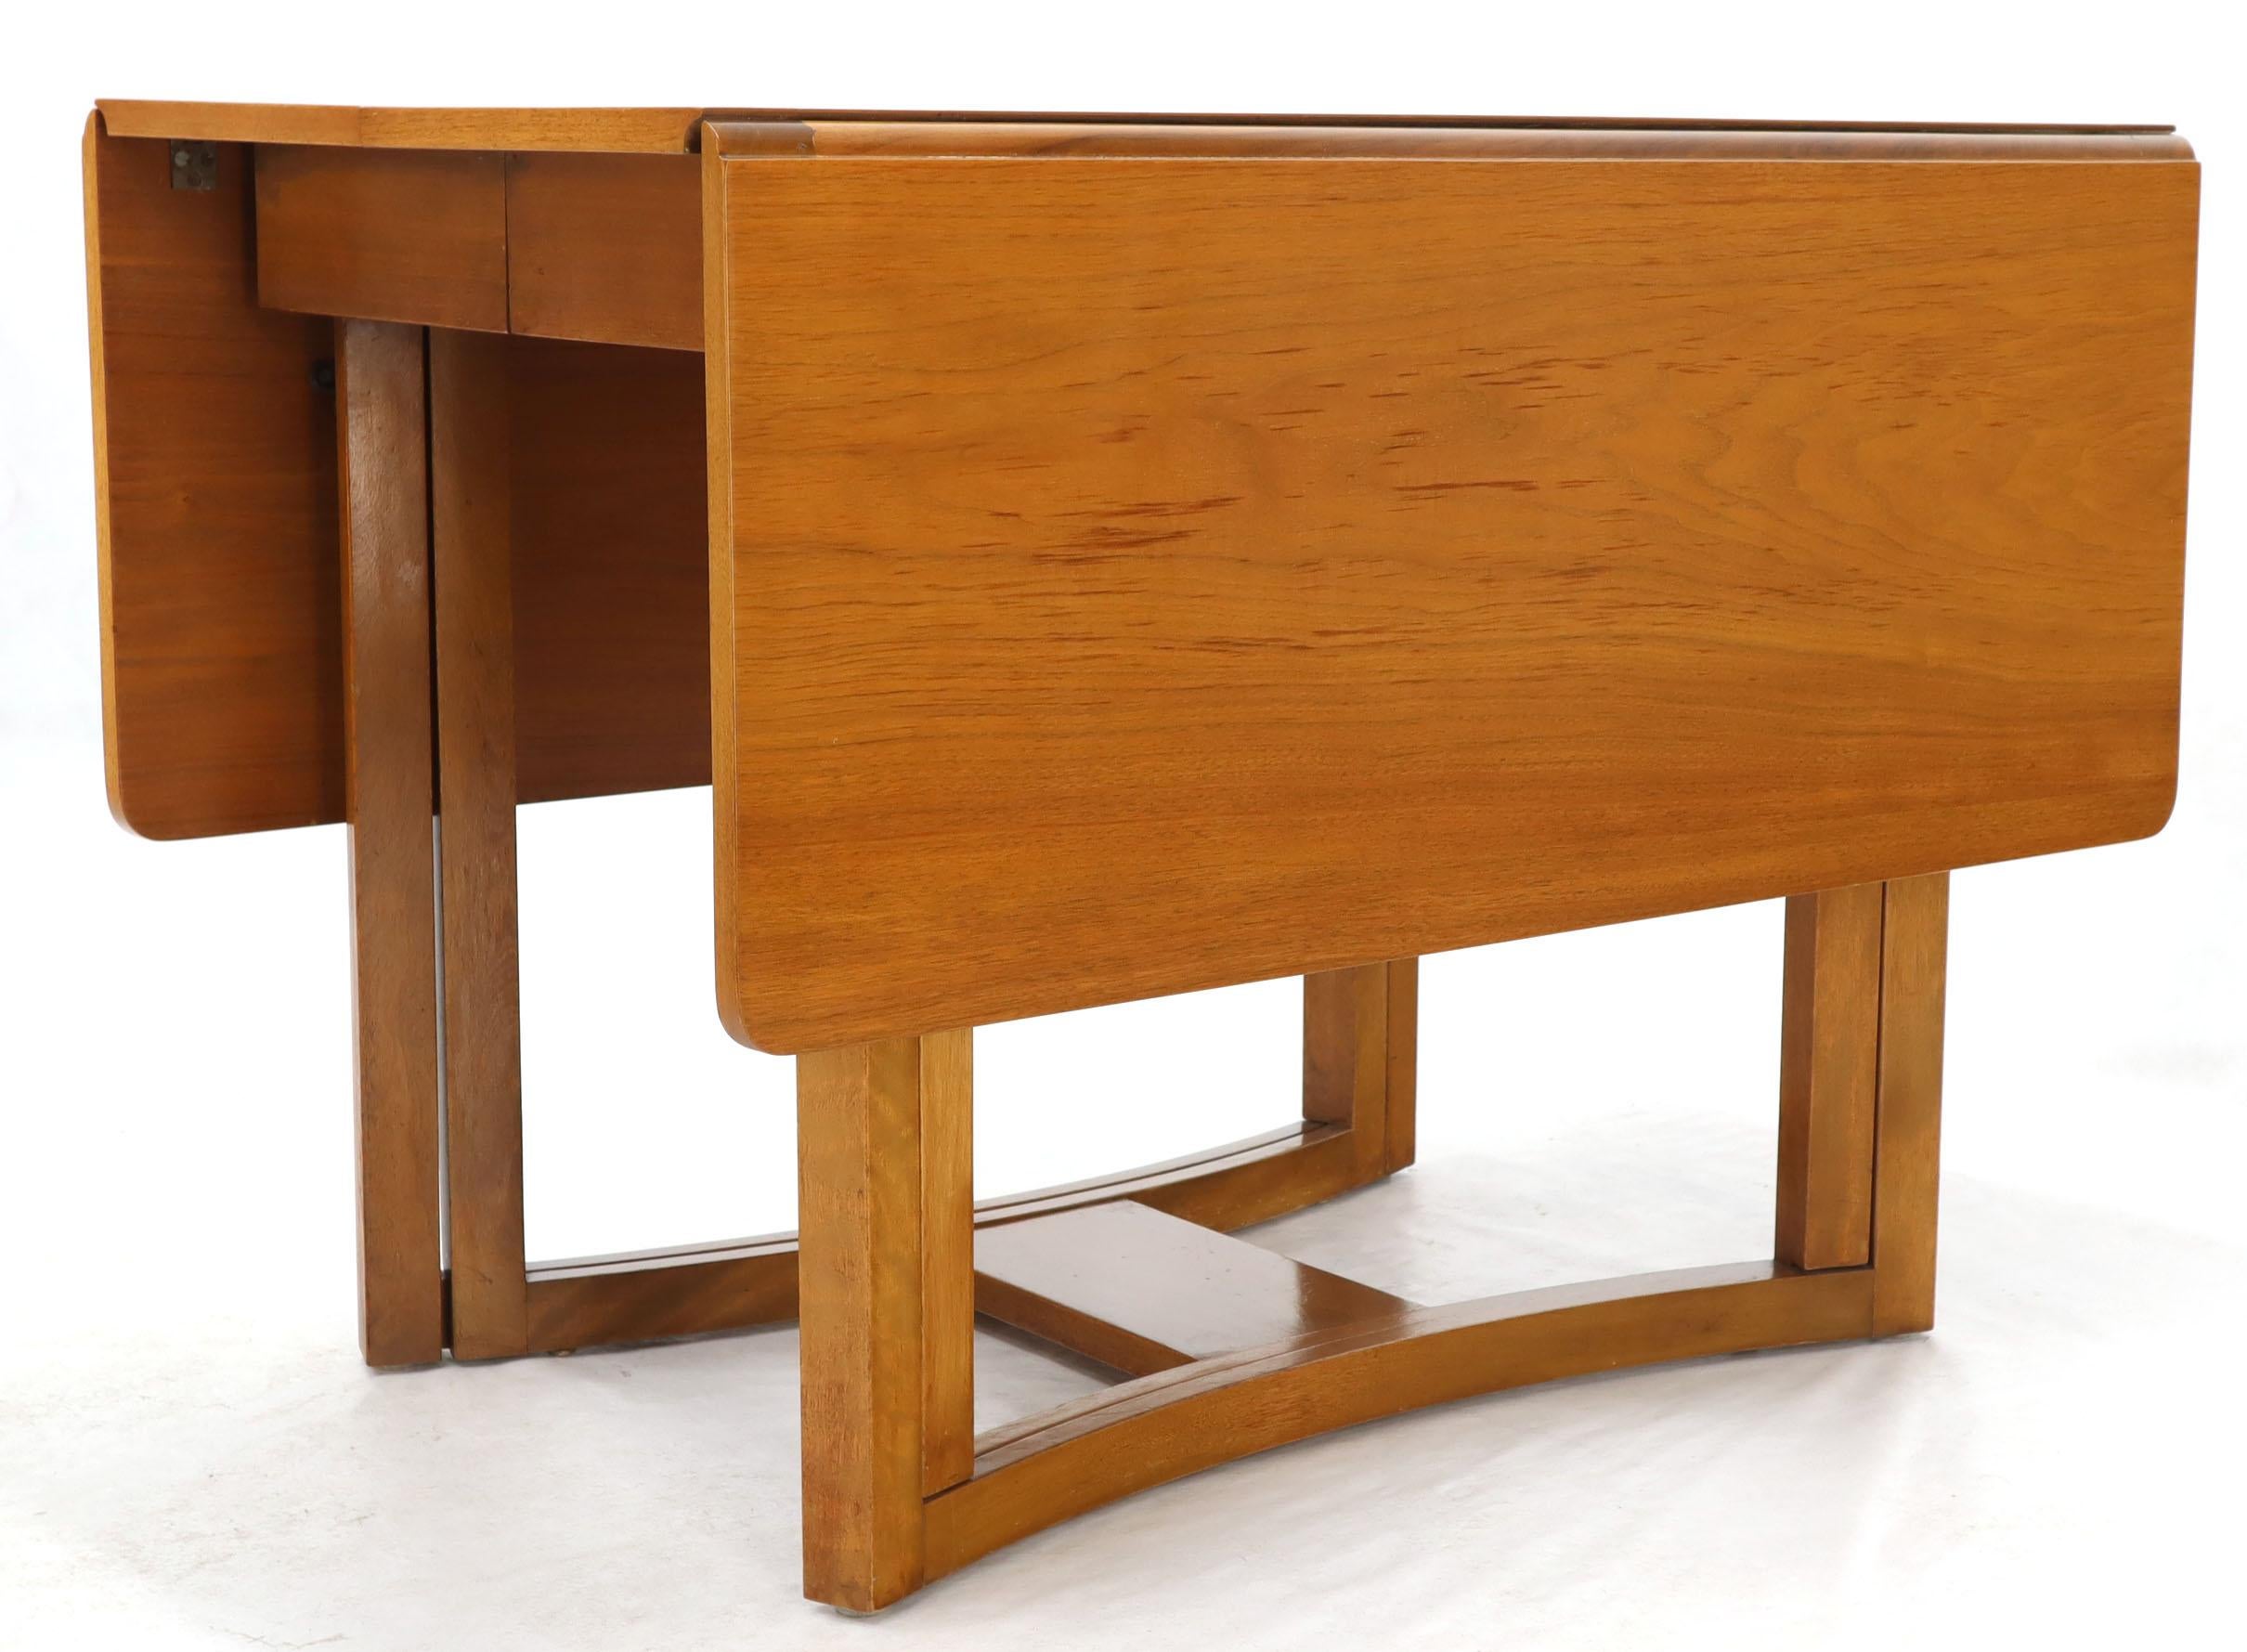 Midcentury Light Walnut Drop Leaf Expandable Dining Table, Three Leafs Boards im Angebot 4